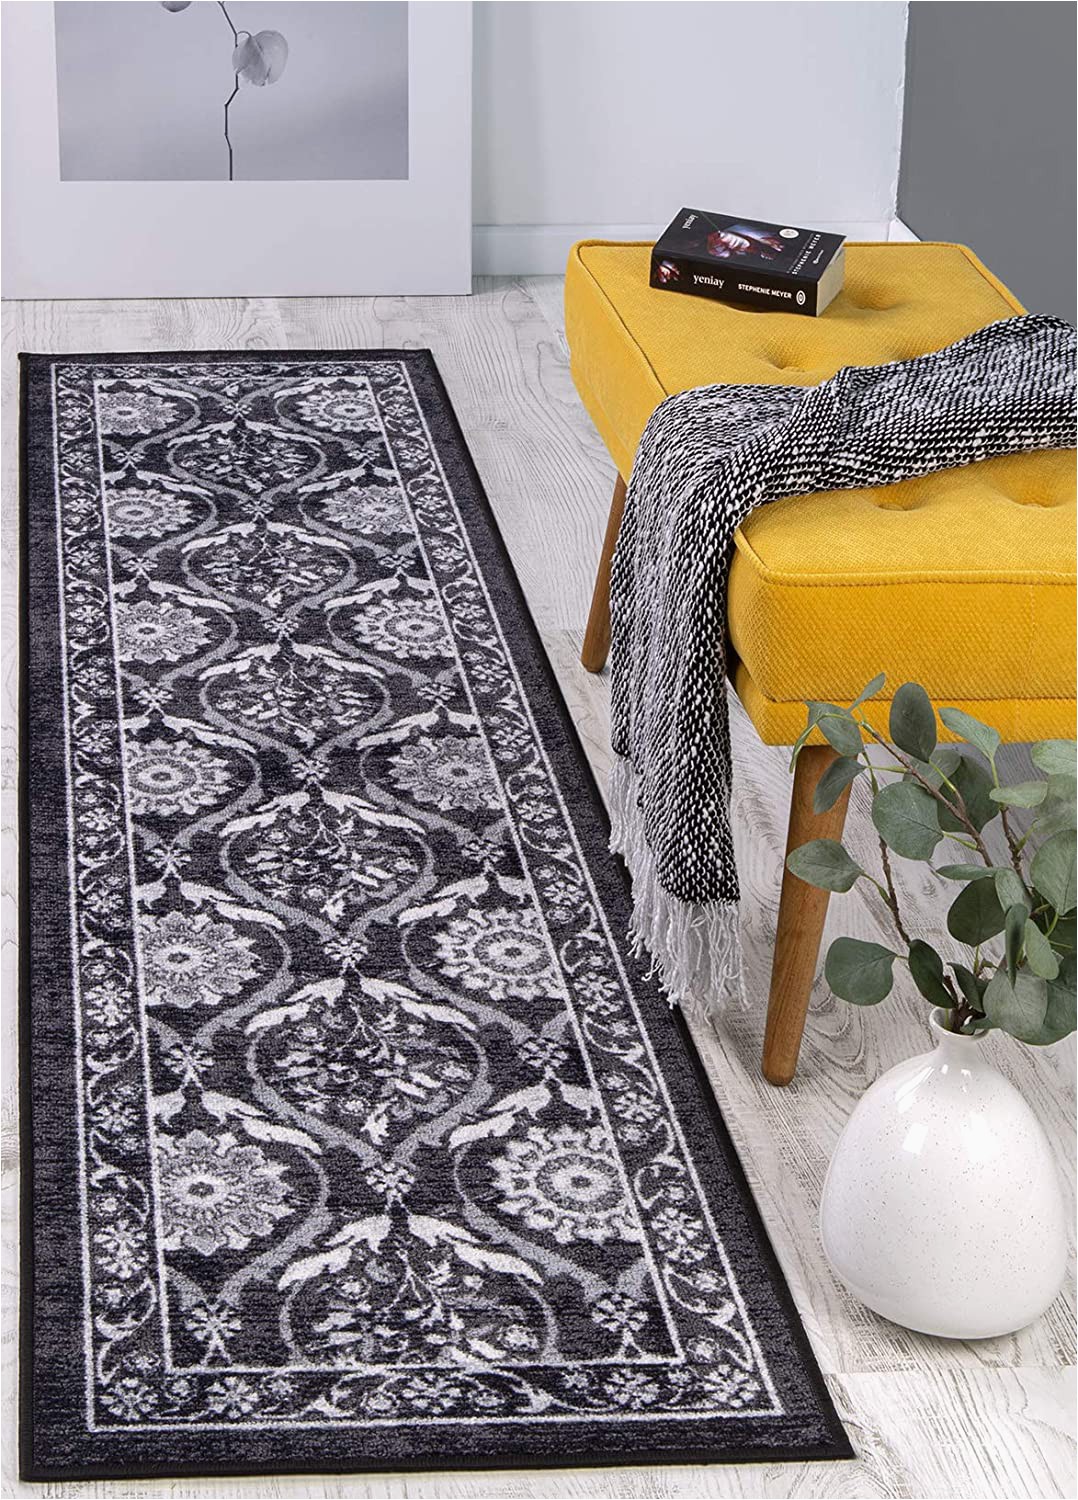 4 X 6 Rubber Backed area Rugs Antep Rugs Casa Azul Collection Geometric Floral Non Skid Non Slip Low Profile Pile Rubber Backing Indoor area Rug Grey 1 8" X 4 11"